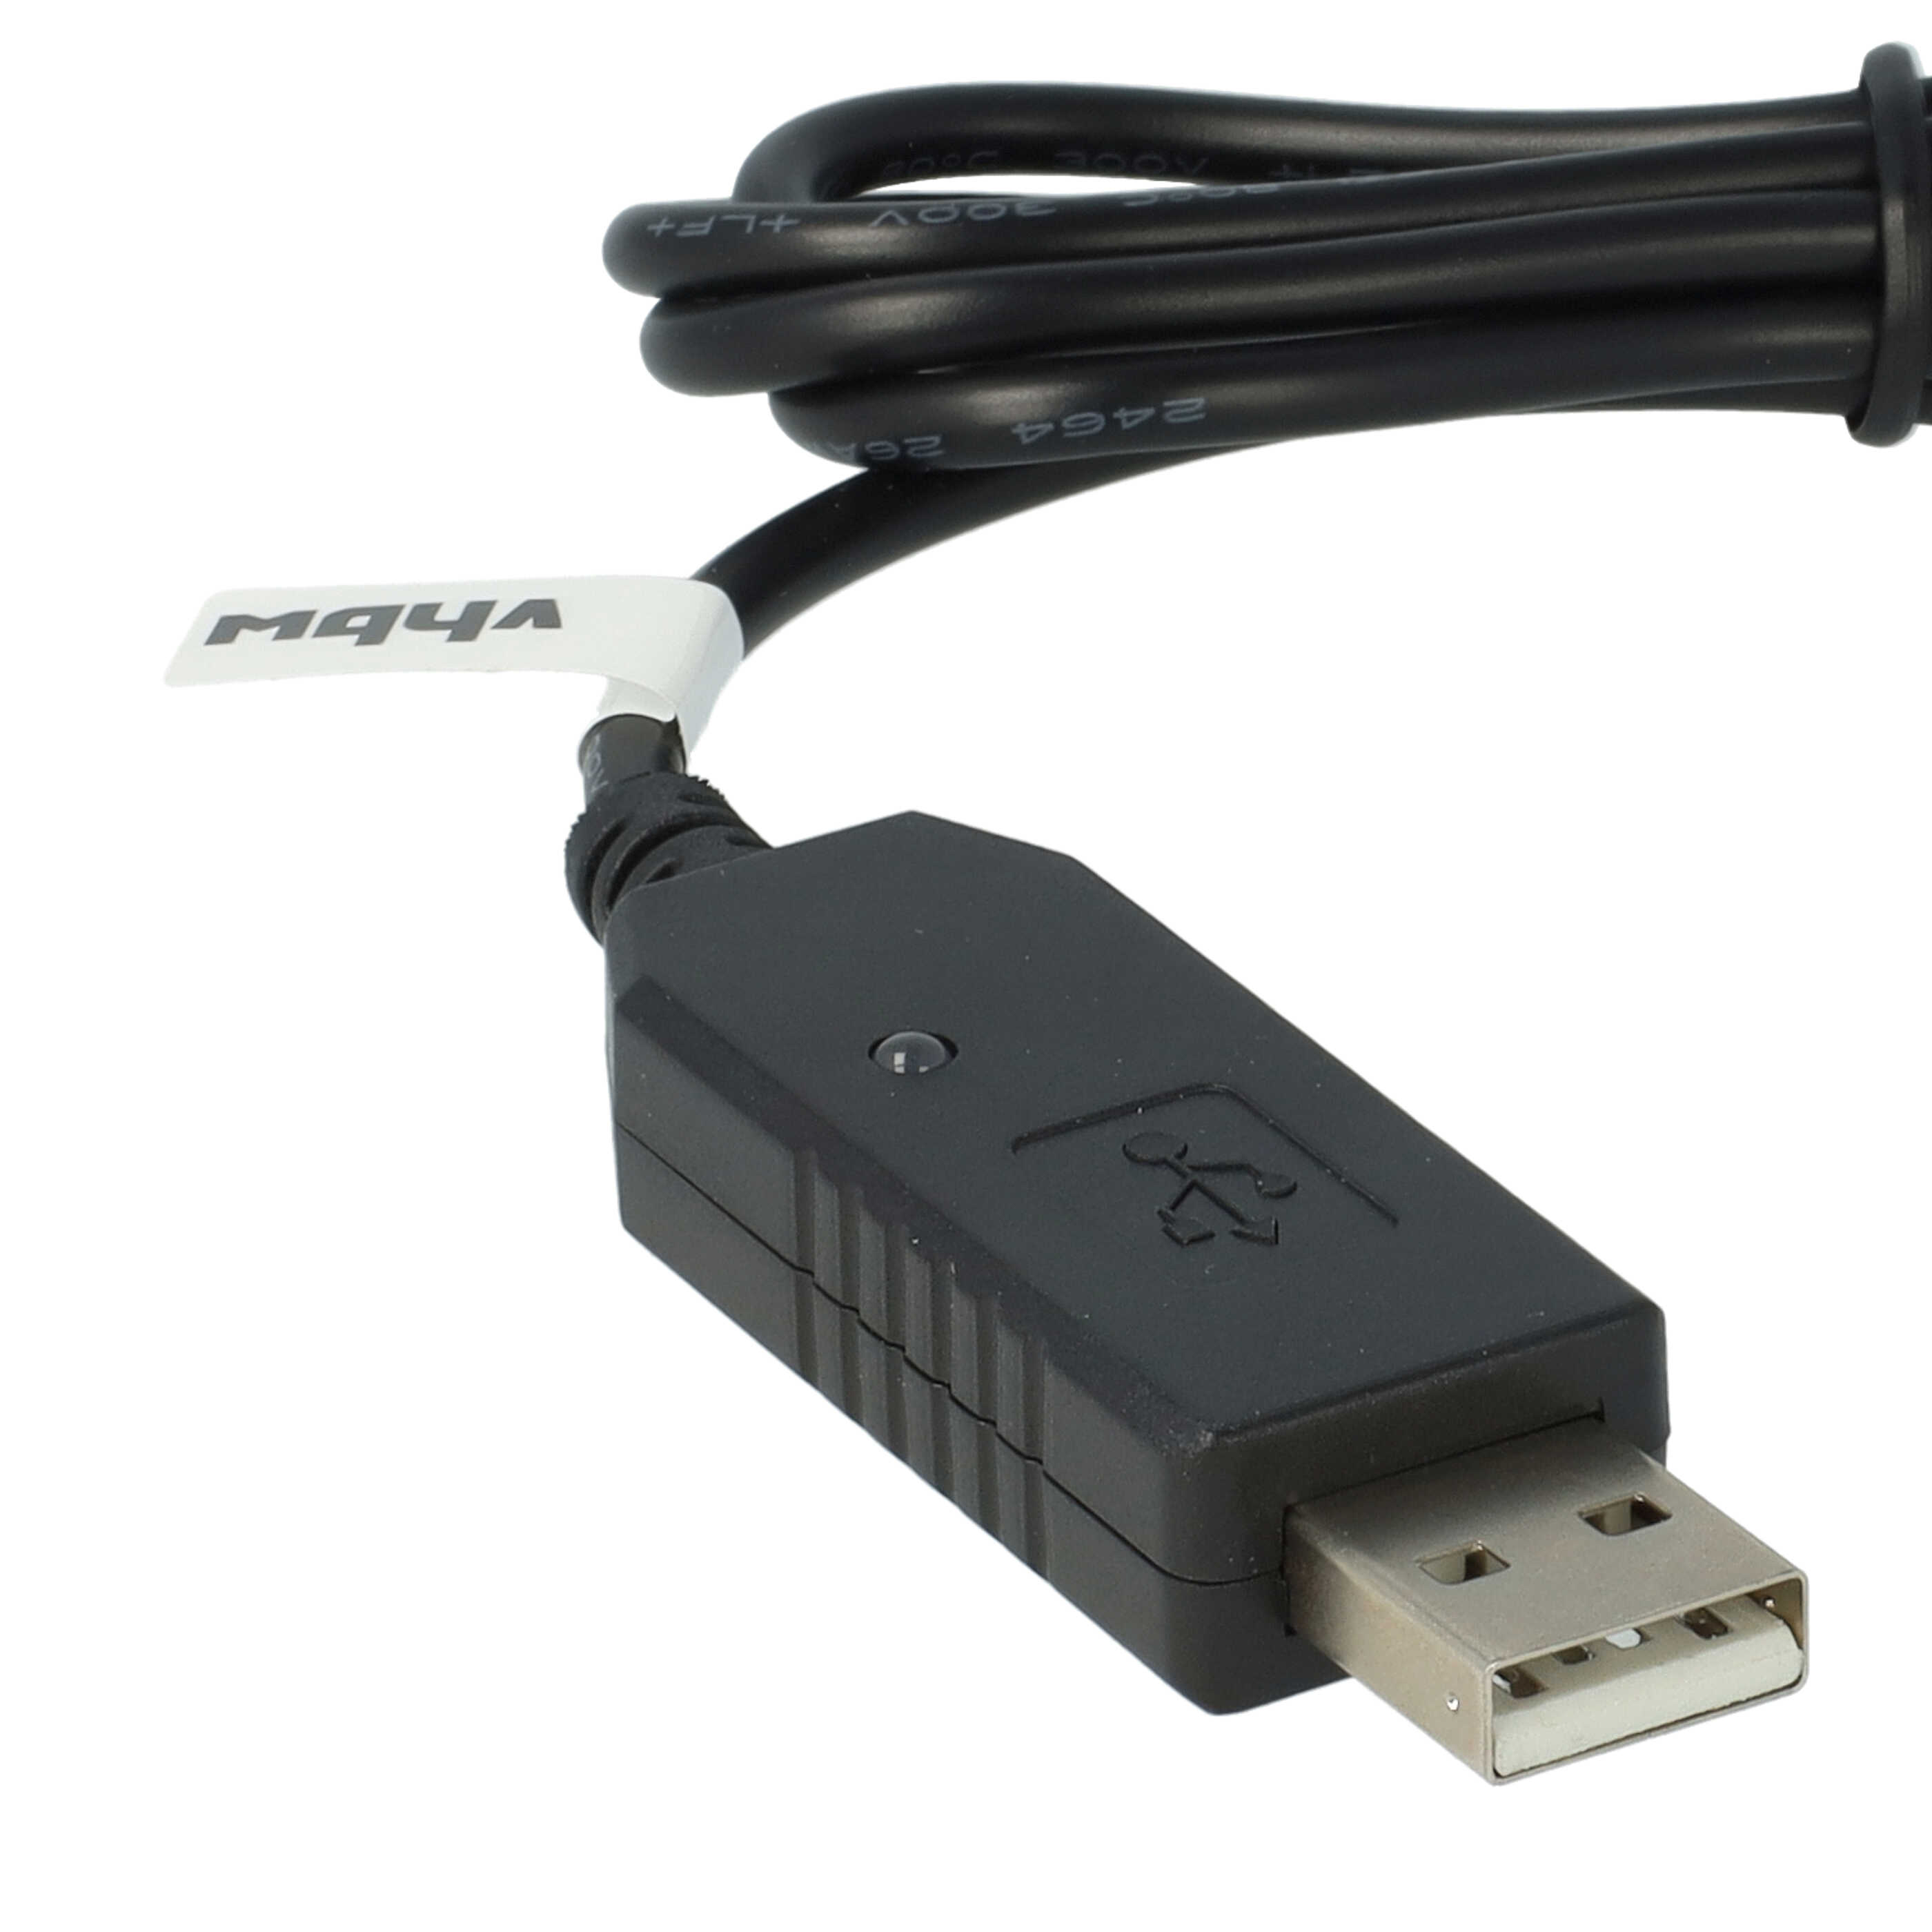 USB Charging Cable suitable for Baofeng UV-B5 Walkie Talkie, Two Way Radio Batteries - 100 cm